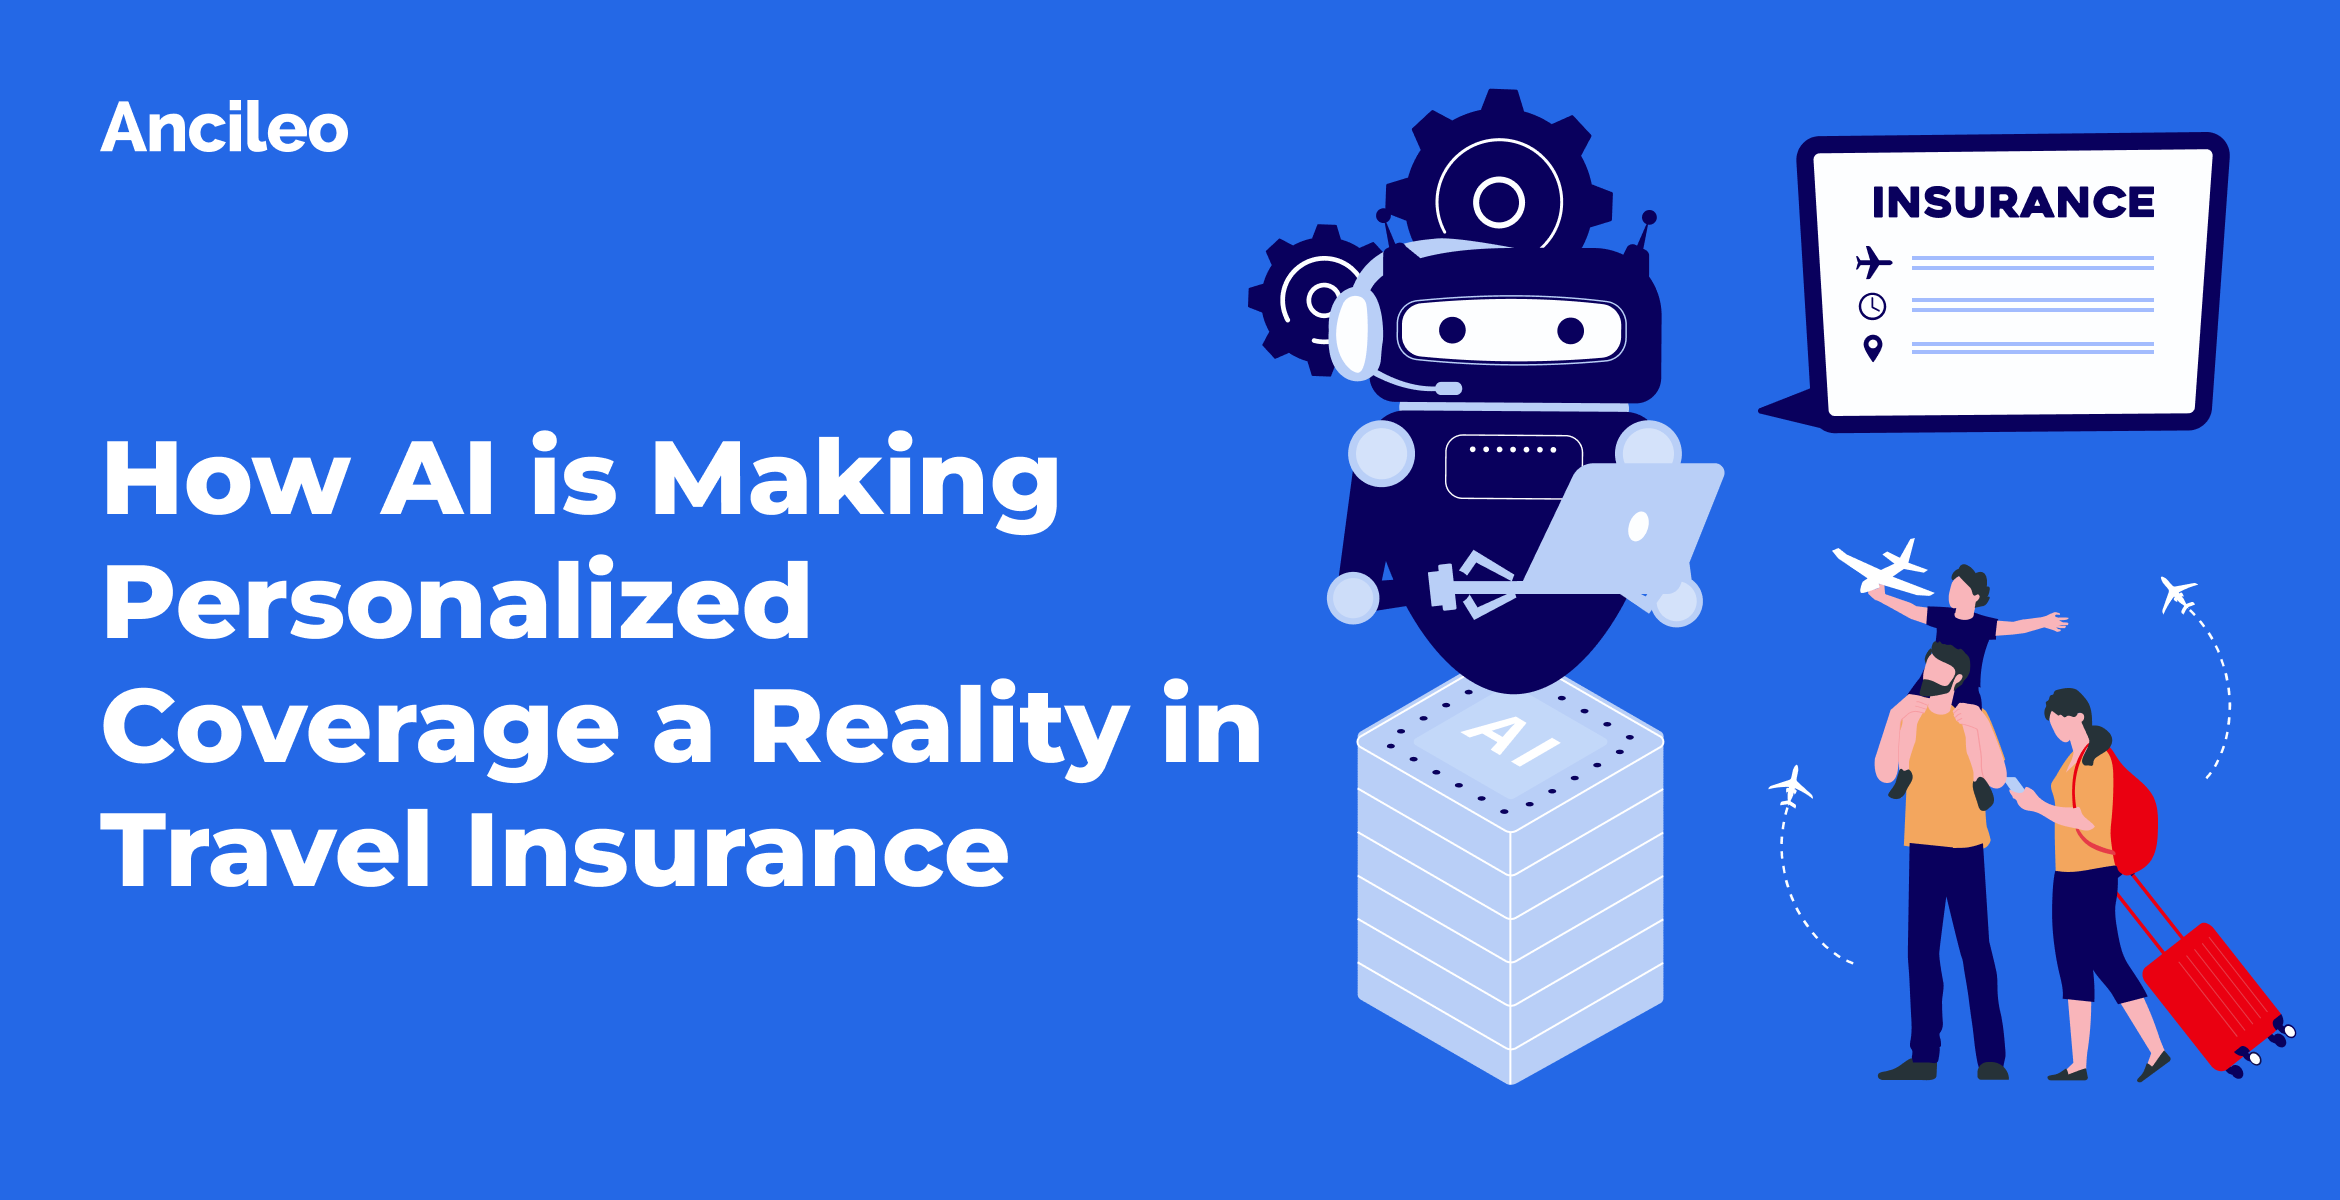 Travel Insurance In AI Making Personalized Coverage - Ancileo